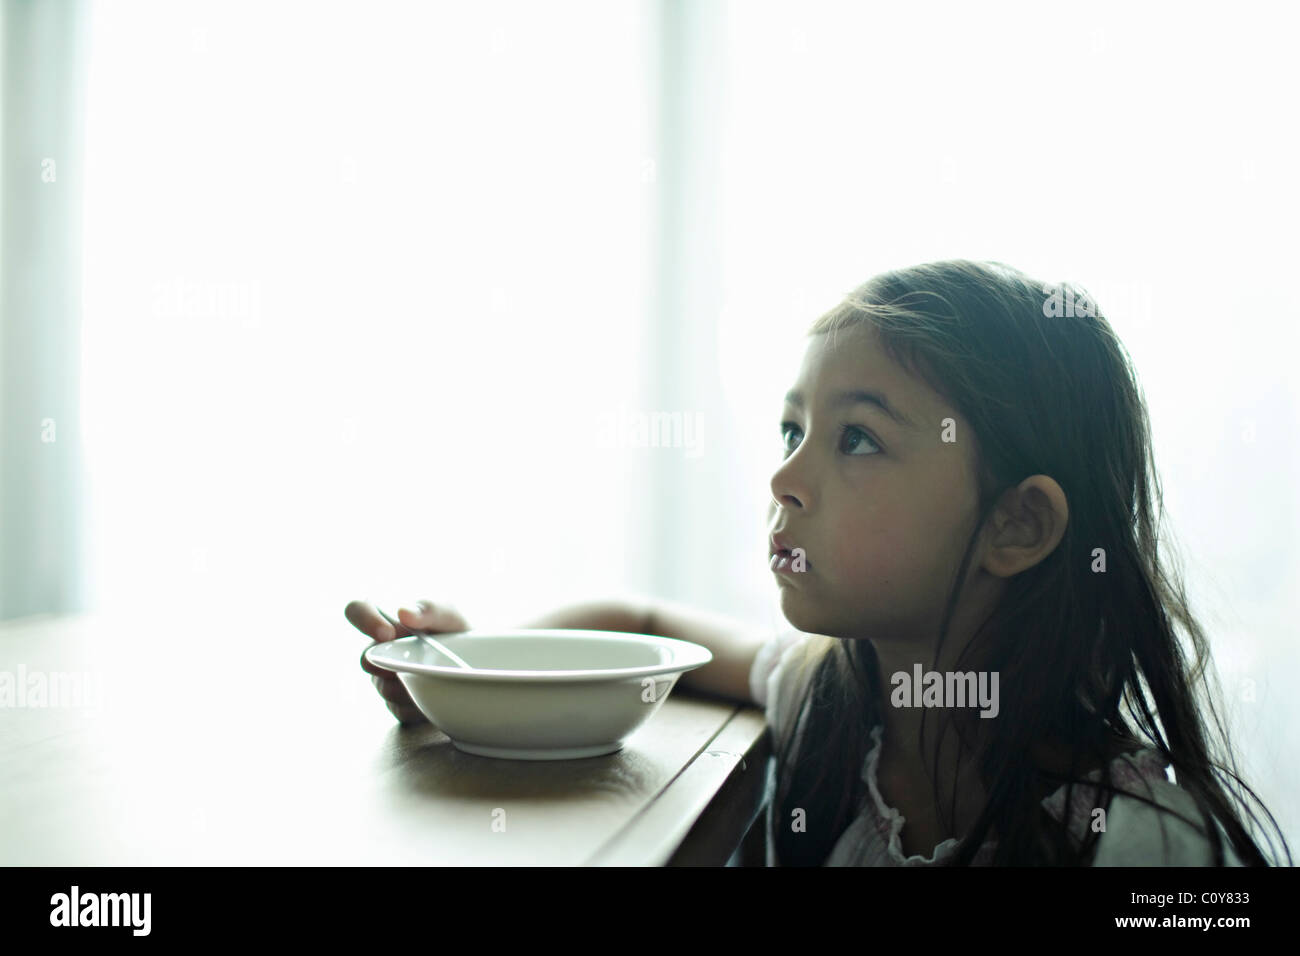 Six year old girl with bowl of breakfast cereal Stock Photo